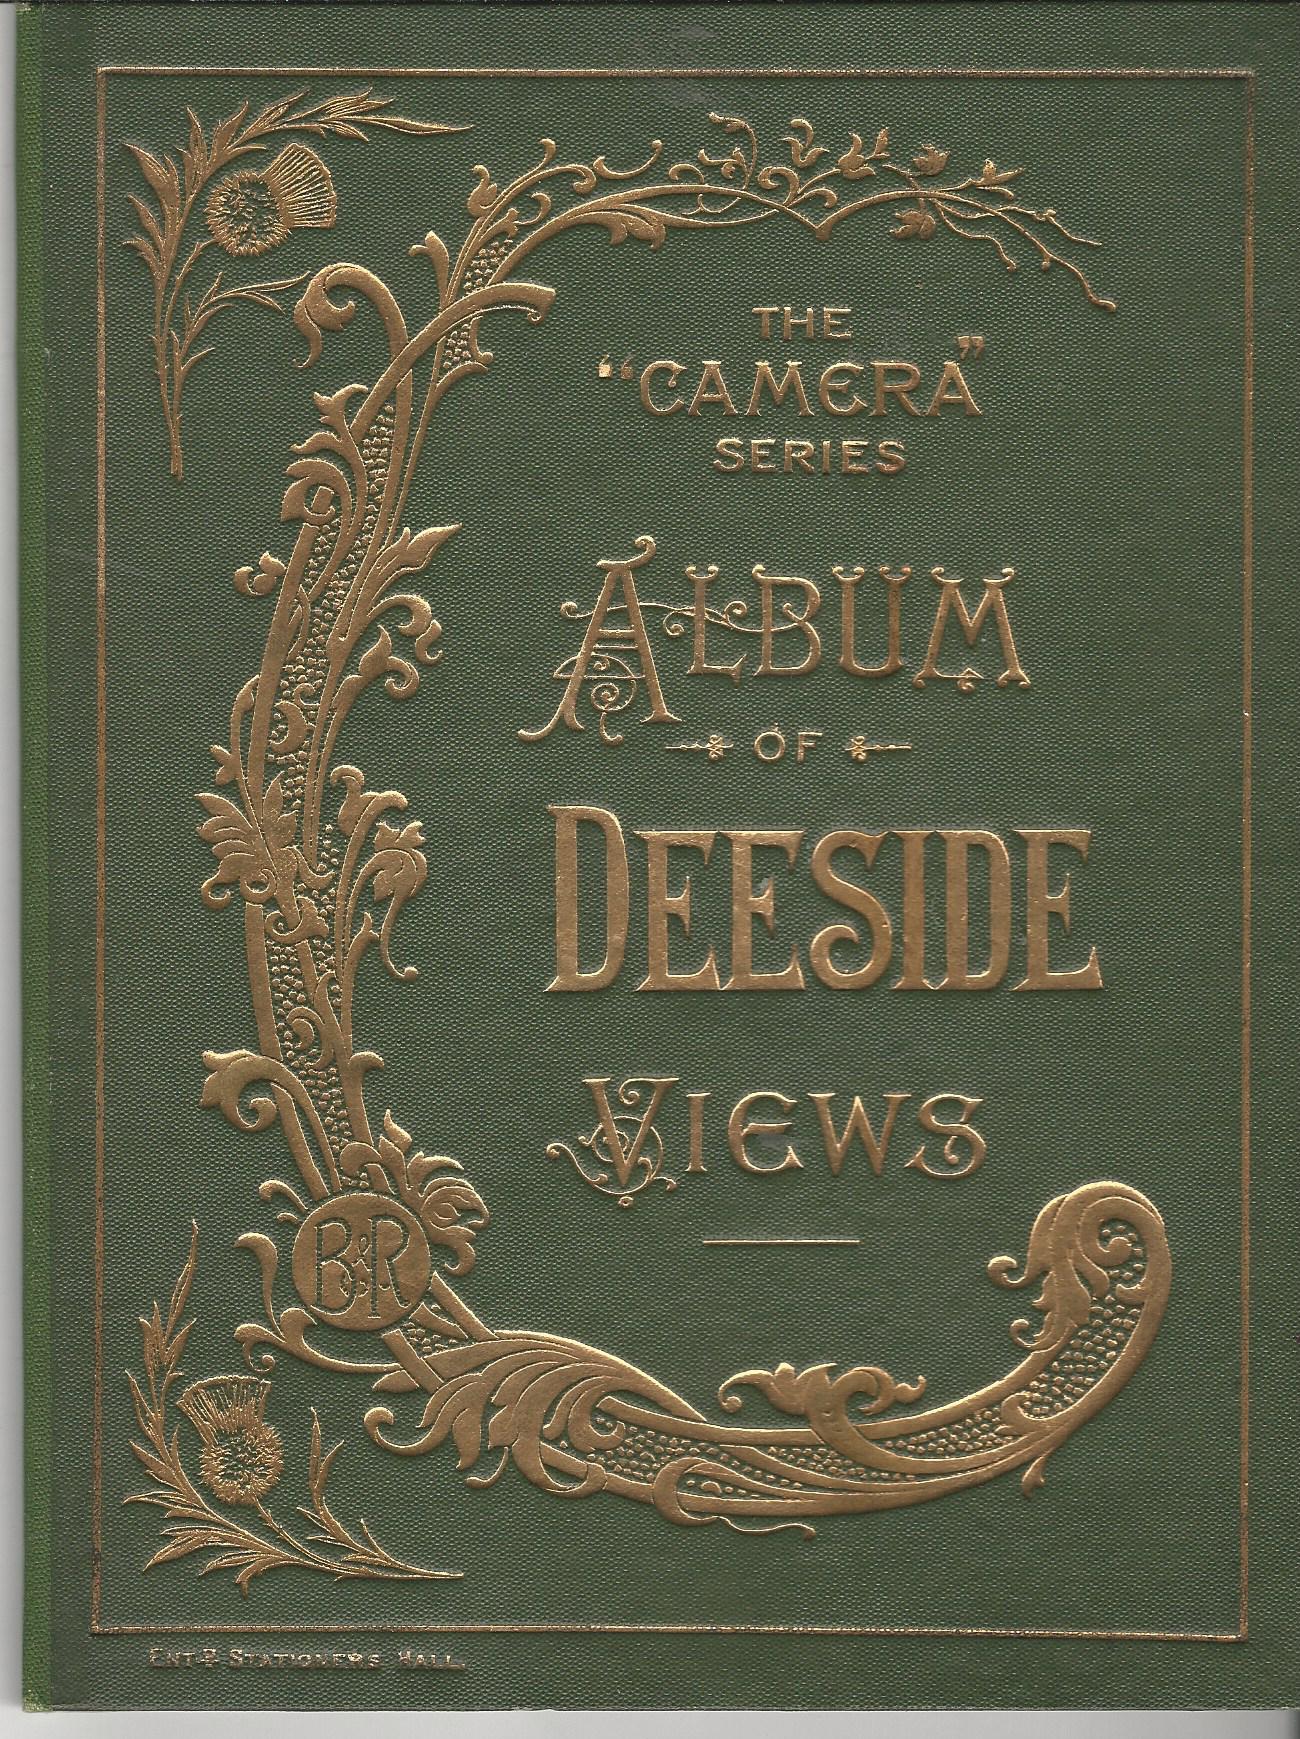 Image for Album of Deeside, The Camera Series.